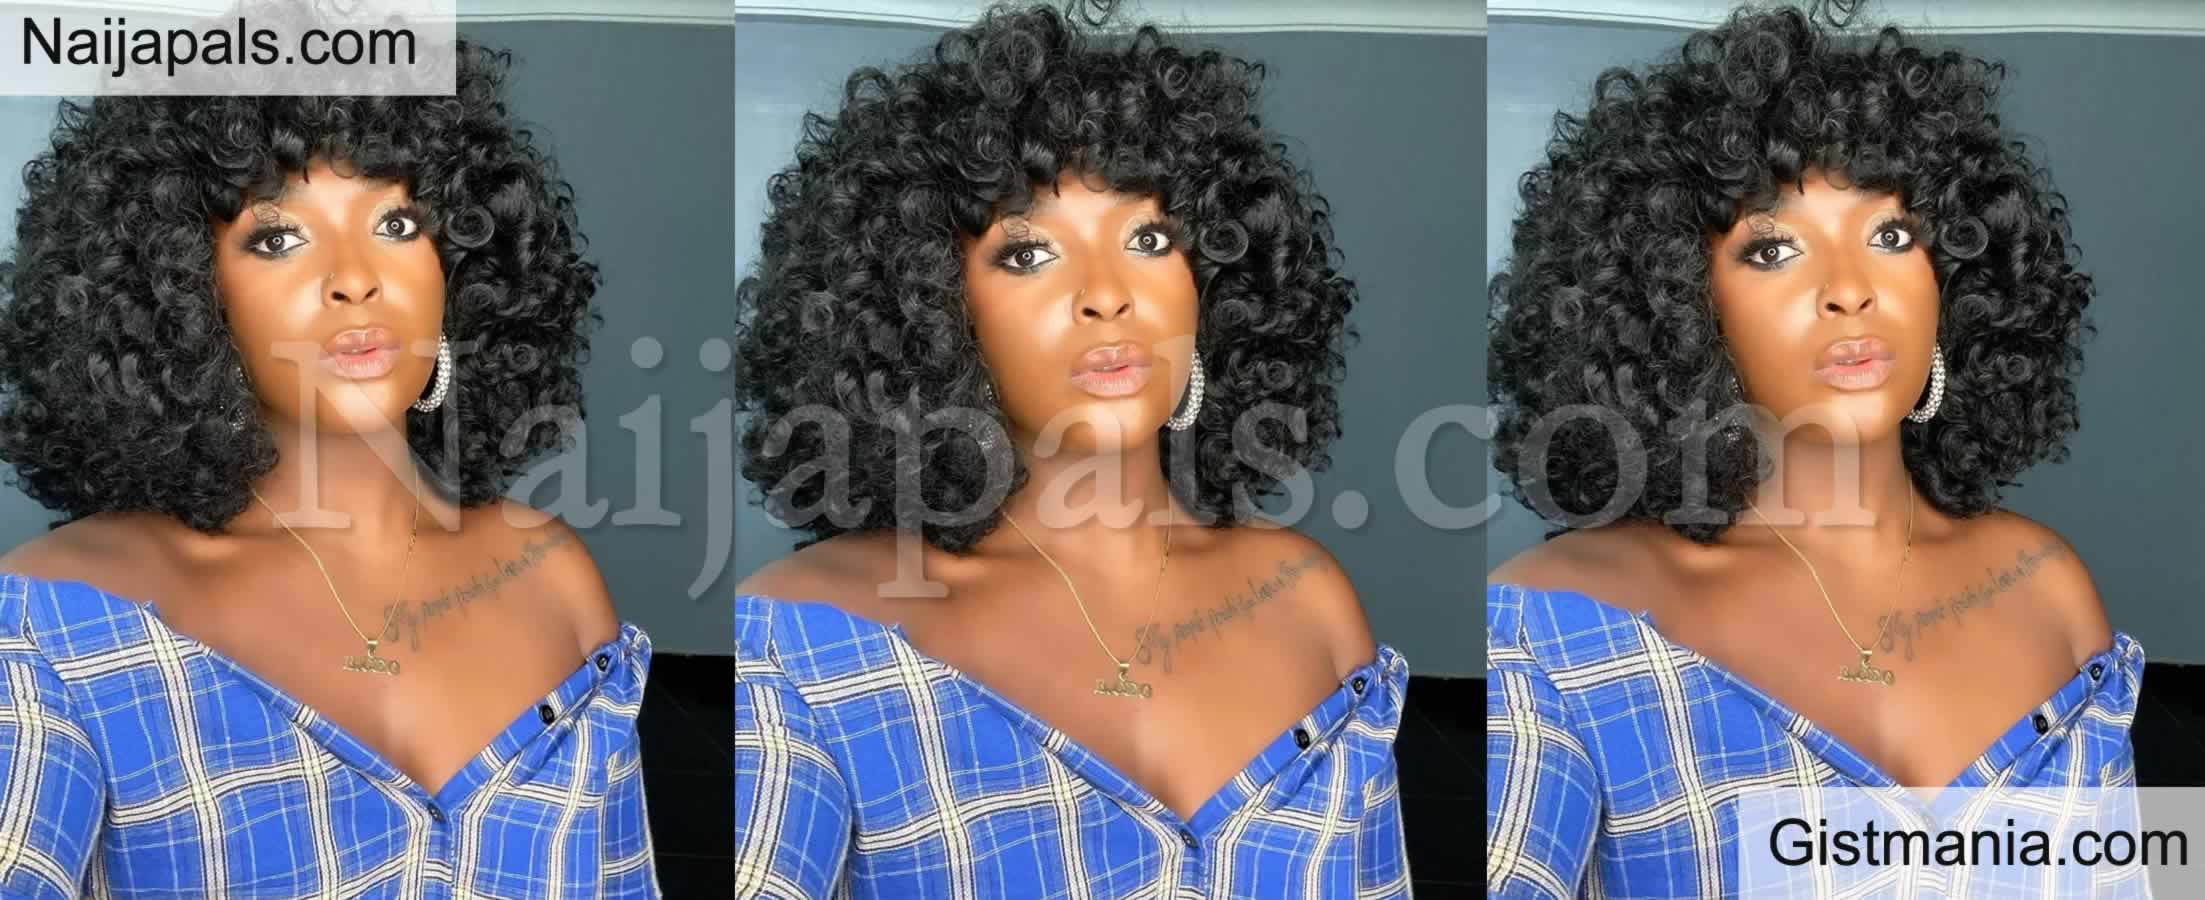 <img alt='.' class='lazyload' data-src='https://img.gistmania.com/emot/comment.gif' /> <b>“Learn To Respect Other People’s Culture And Religion” – Blessing Okoro Advices Fans</b>